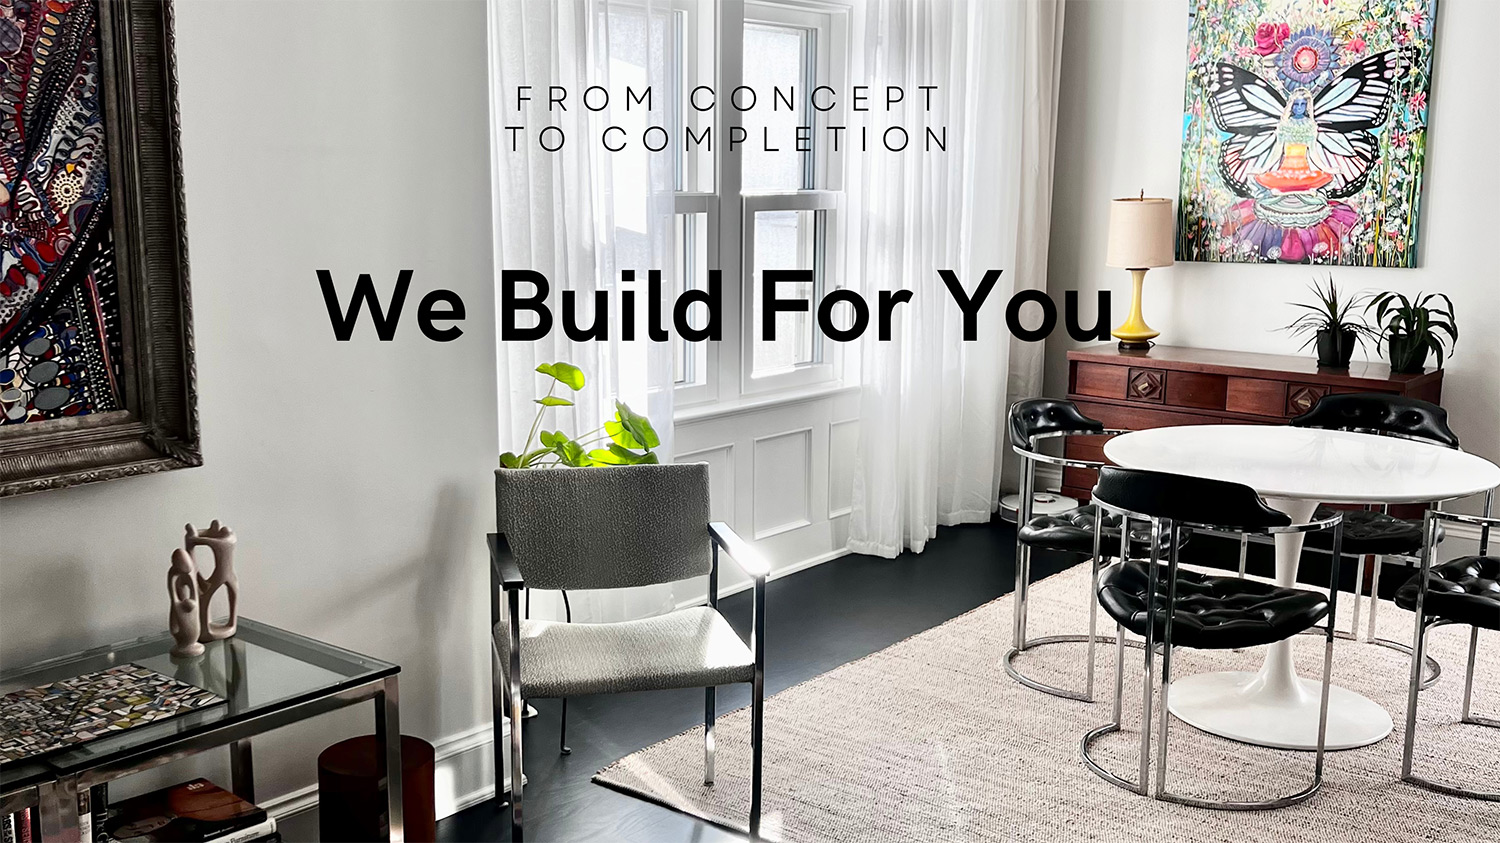 Greenbuild CG: Commercial and Residential Construction and Renovations in NYC, Nassau/Suffolk LI, New Jersey, Connecticut.